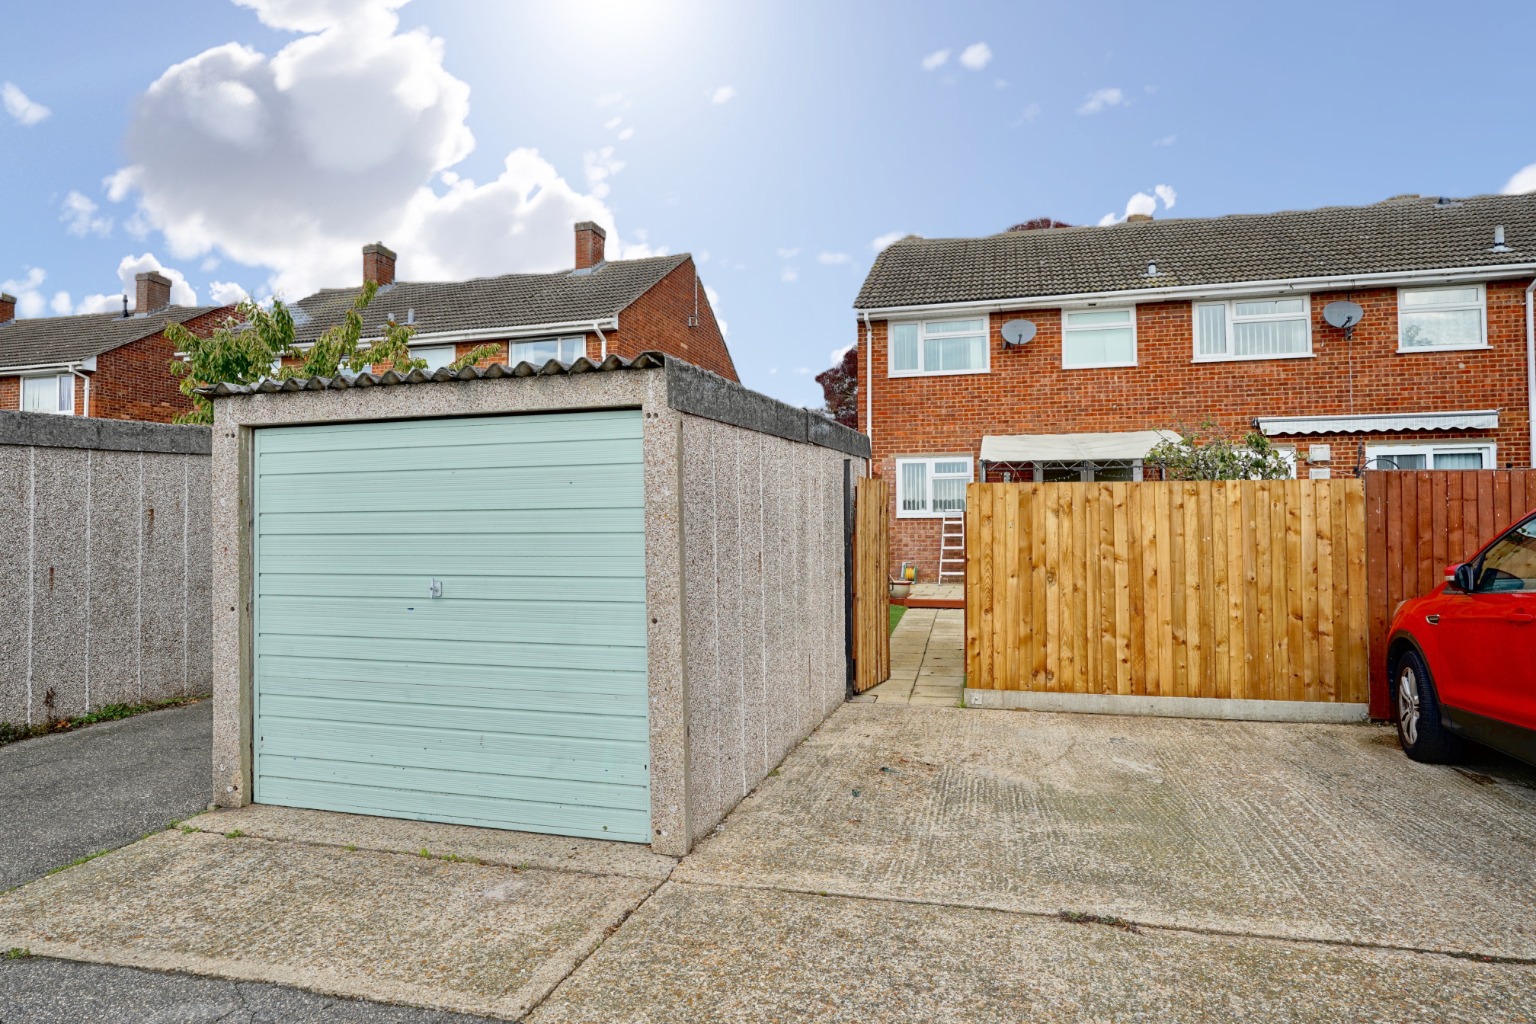 3 bed end of terrace house for sale in Prospero Way, Huntingdon 10